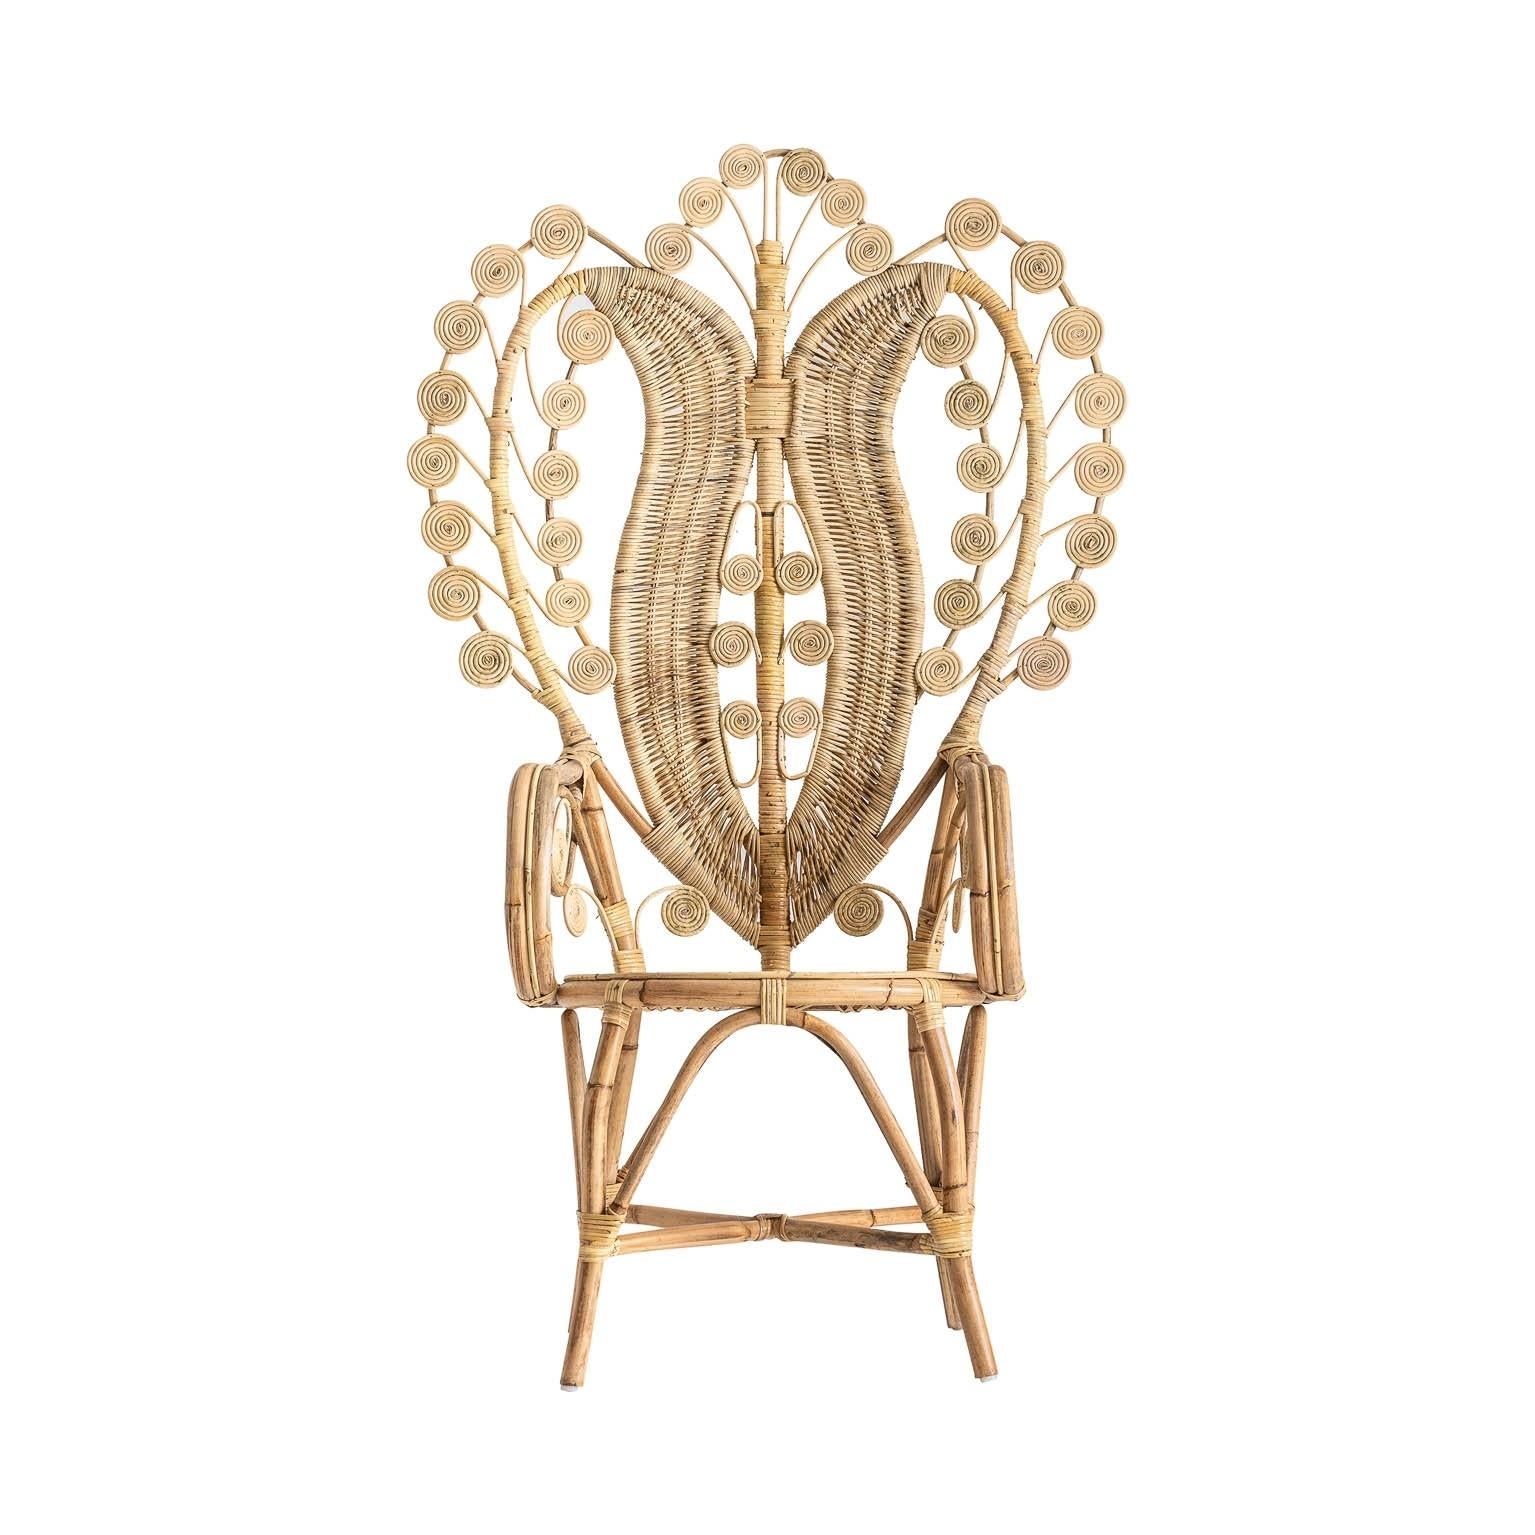 Sculptural and gorgeous rattan and wicker peacock design armchair. Vintage style masterpiece with a Bohemian chic look!